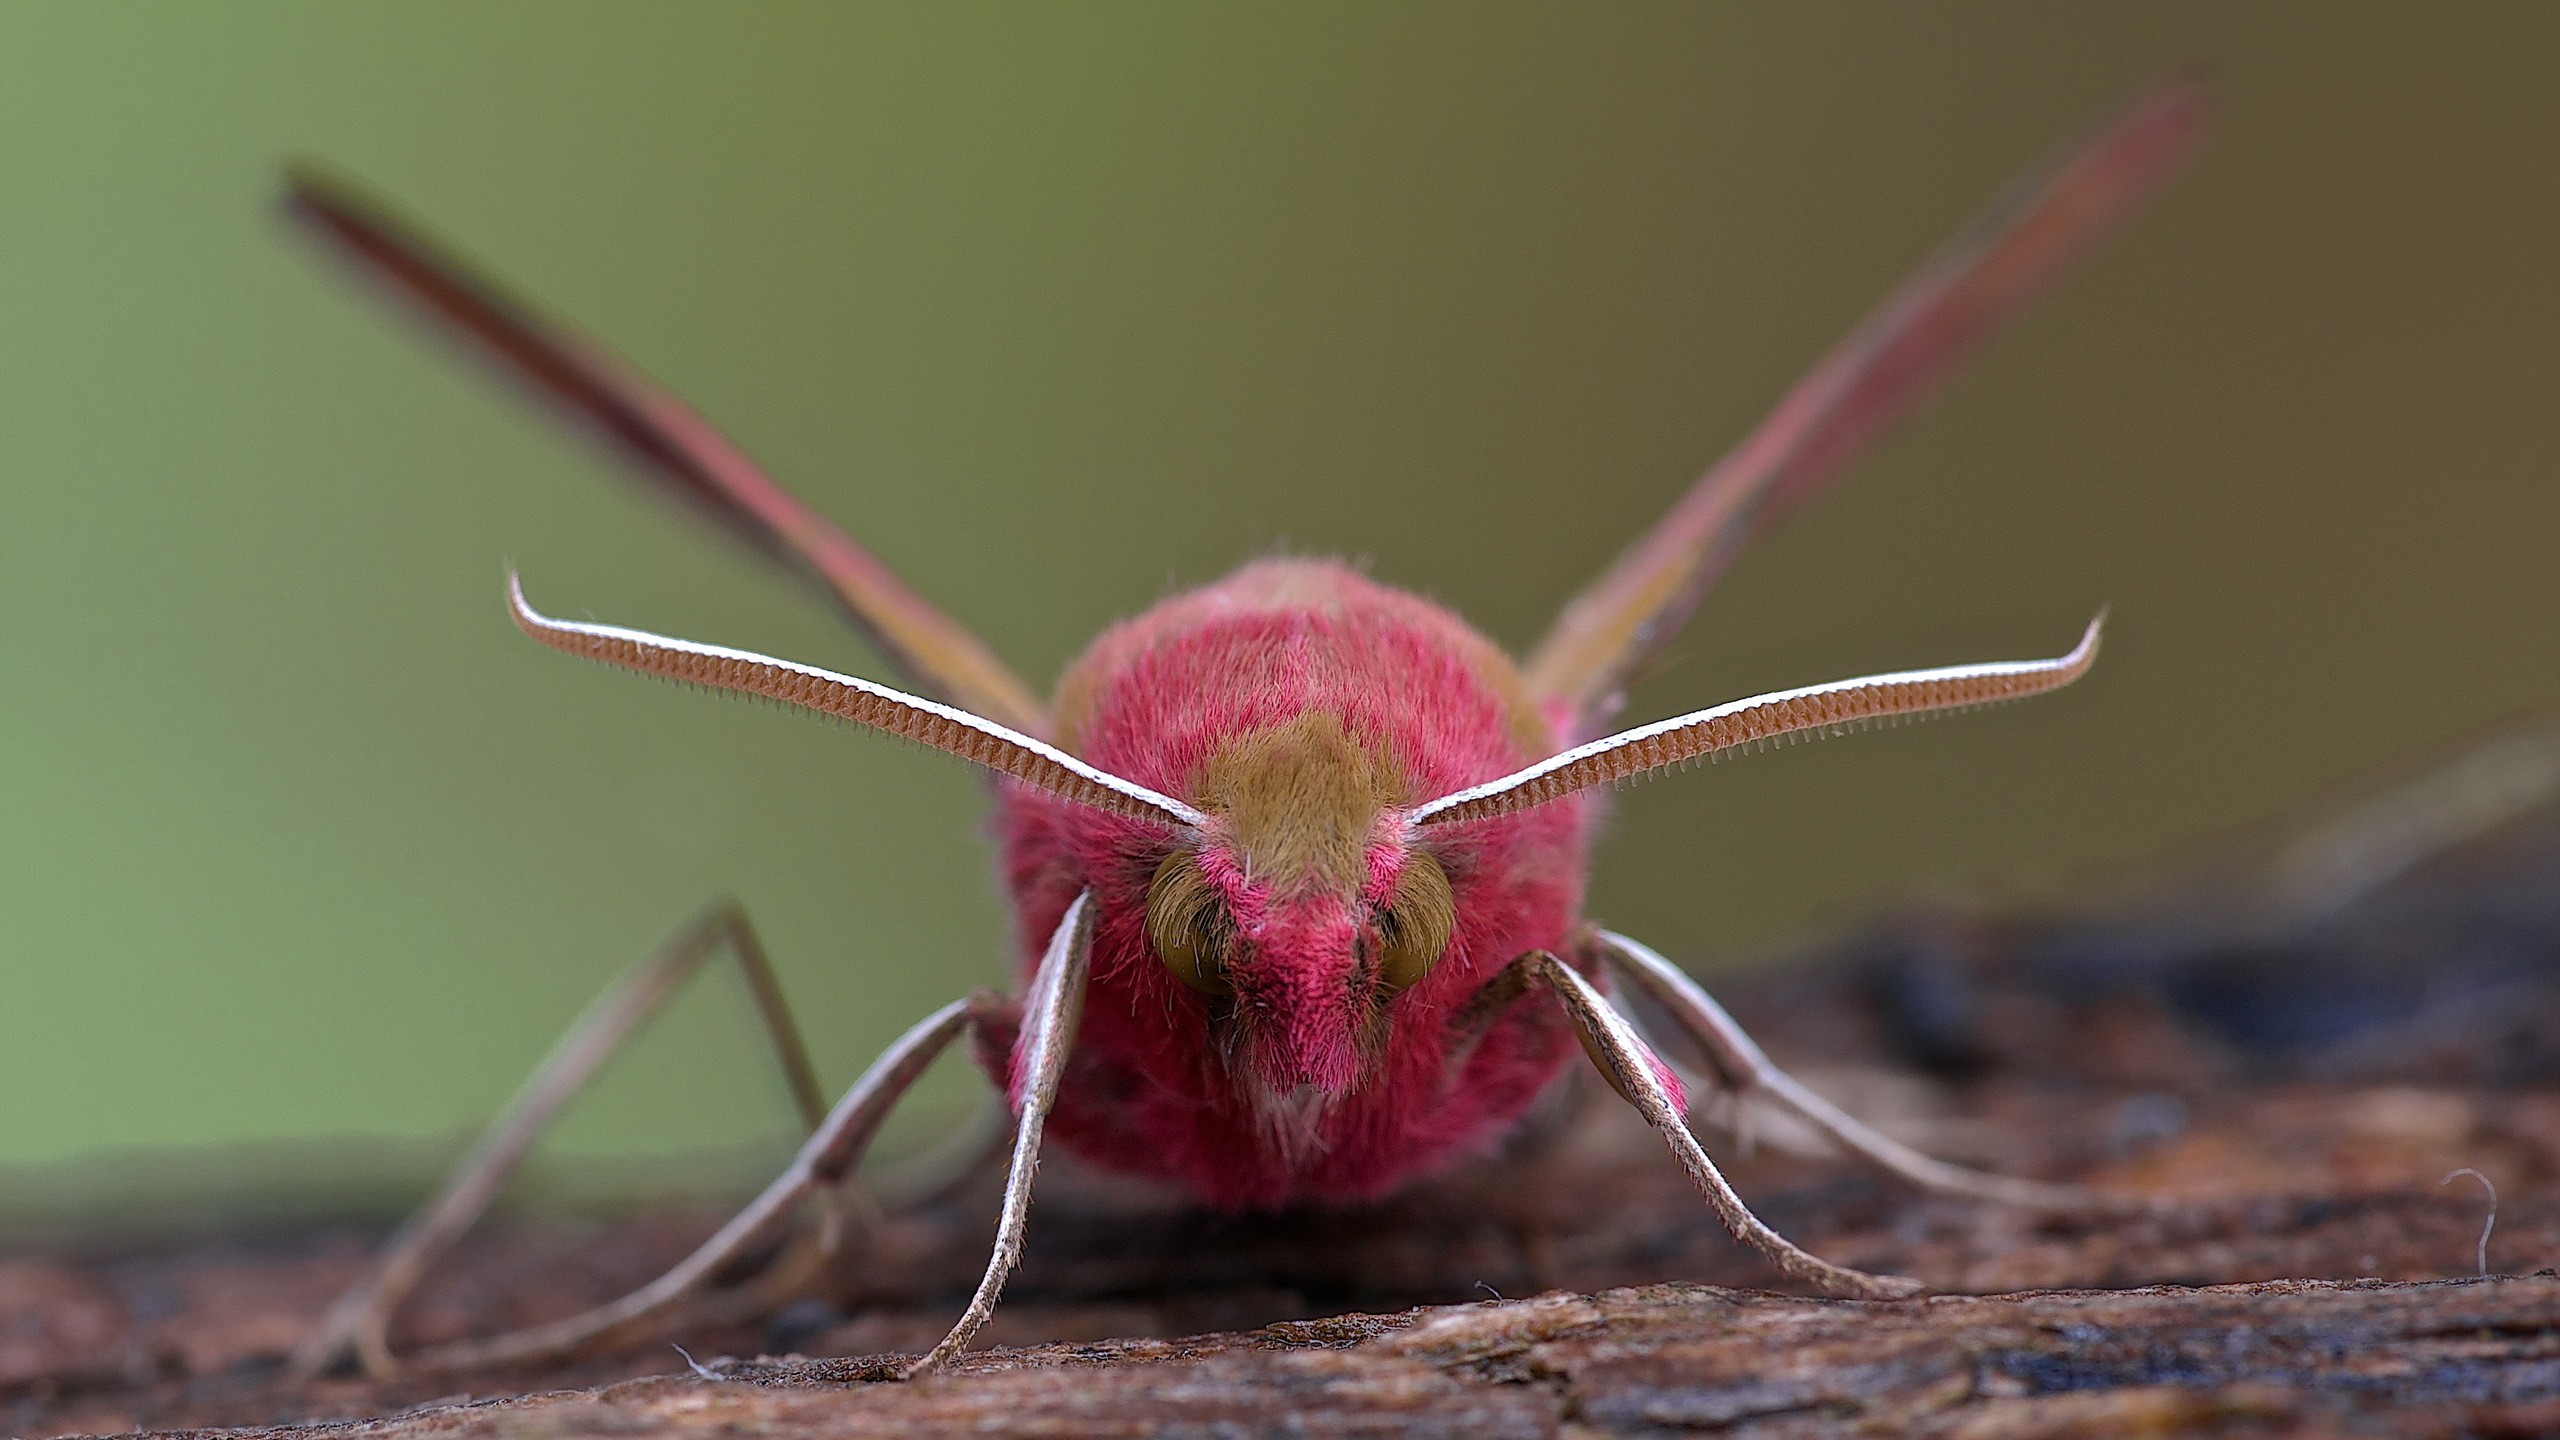 General 2560x1440 animals moth insect lepidoptera macro